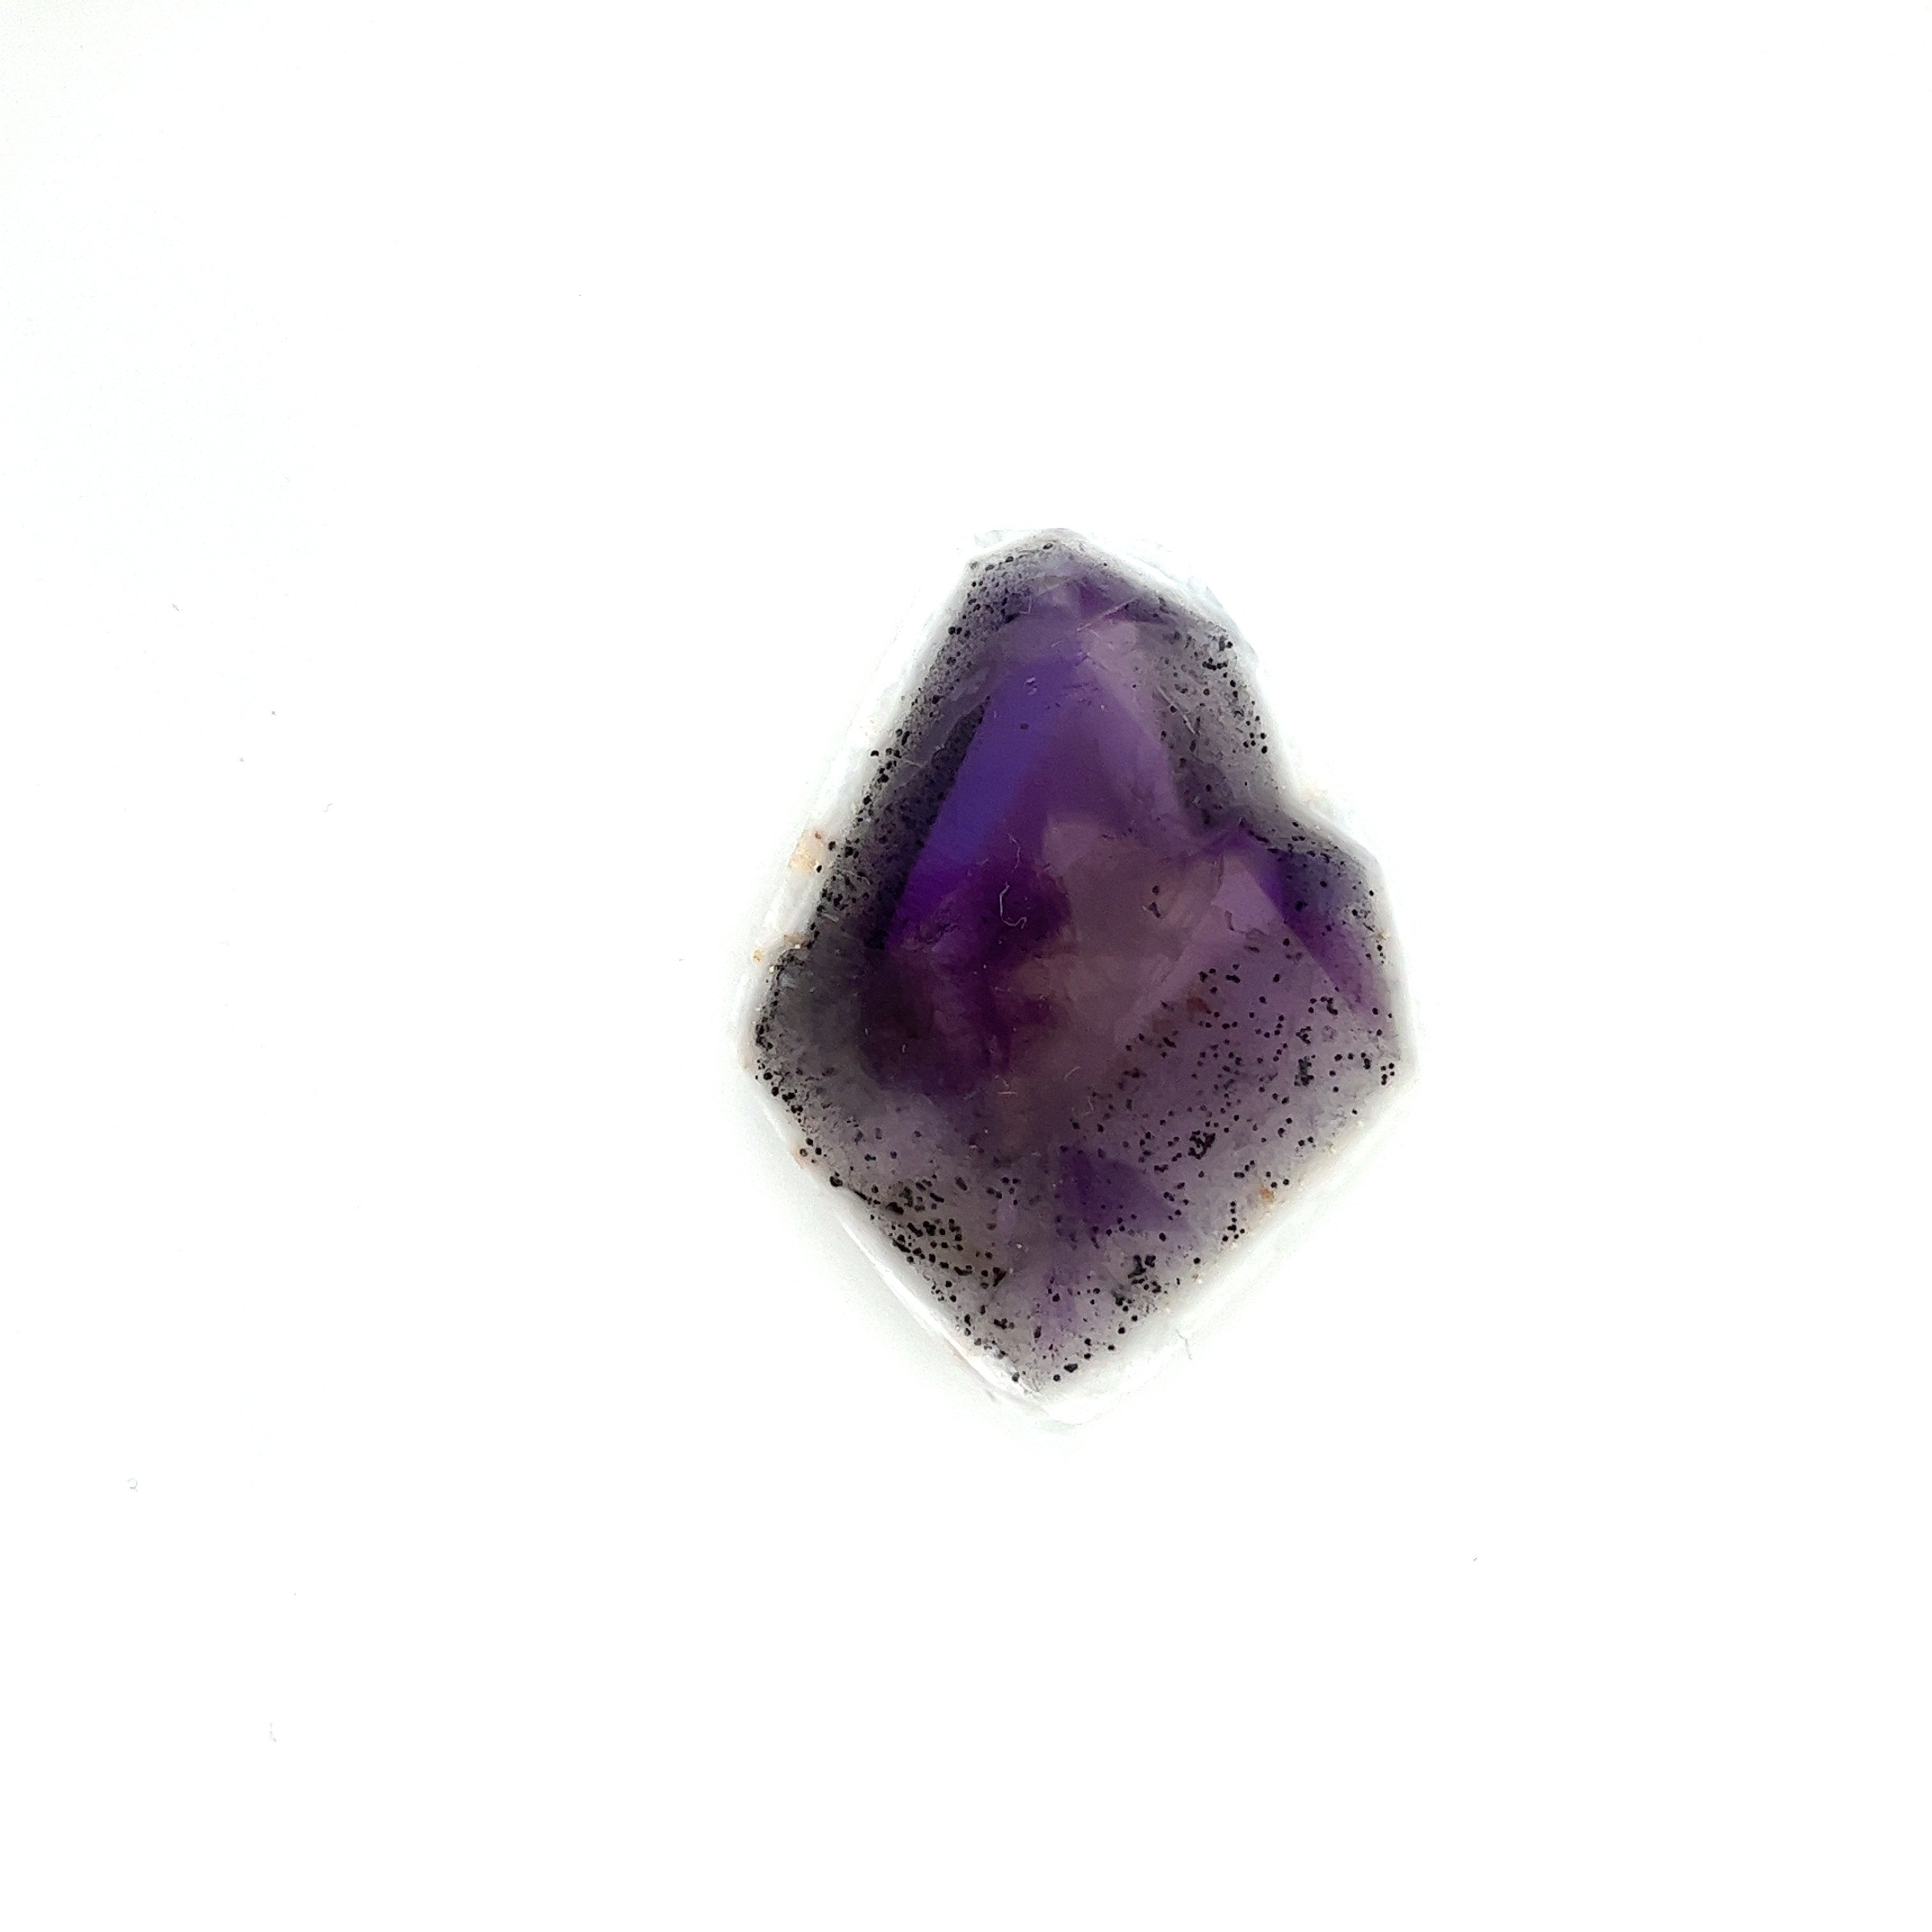 Trapiche Amethyst; Natural Untreated India Amethyst Slice, 14 grams - Mark Oliver Gems